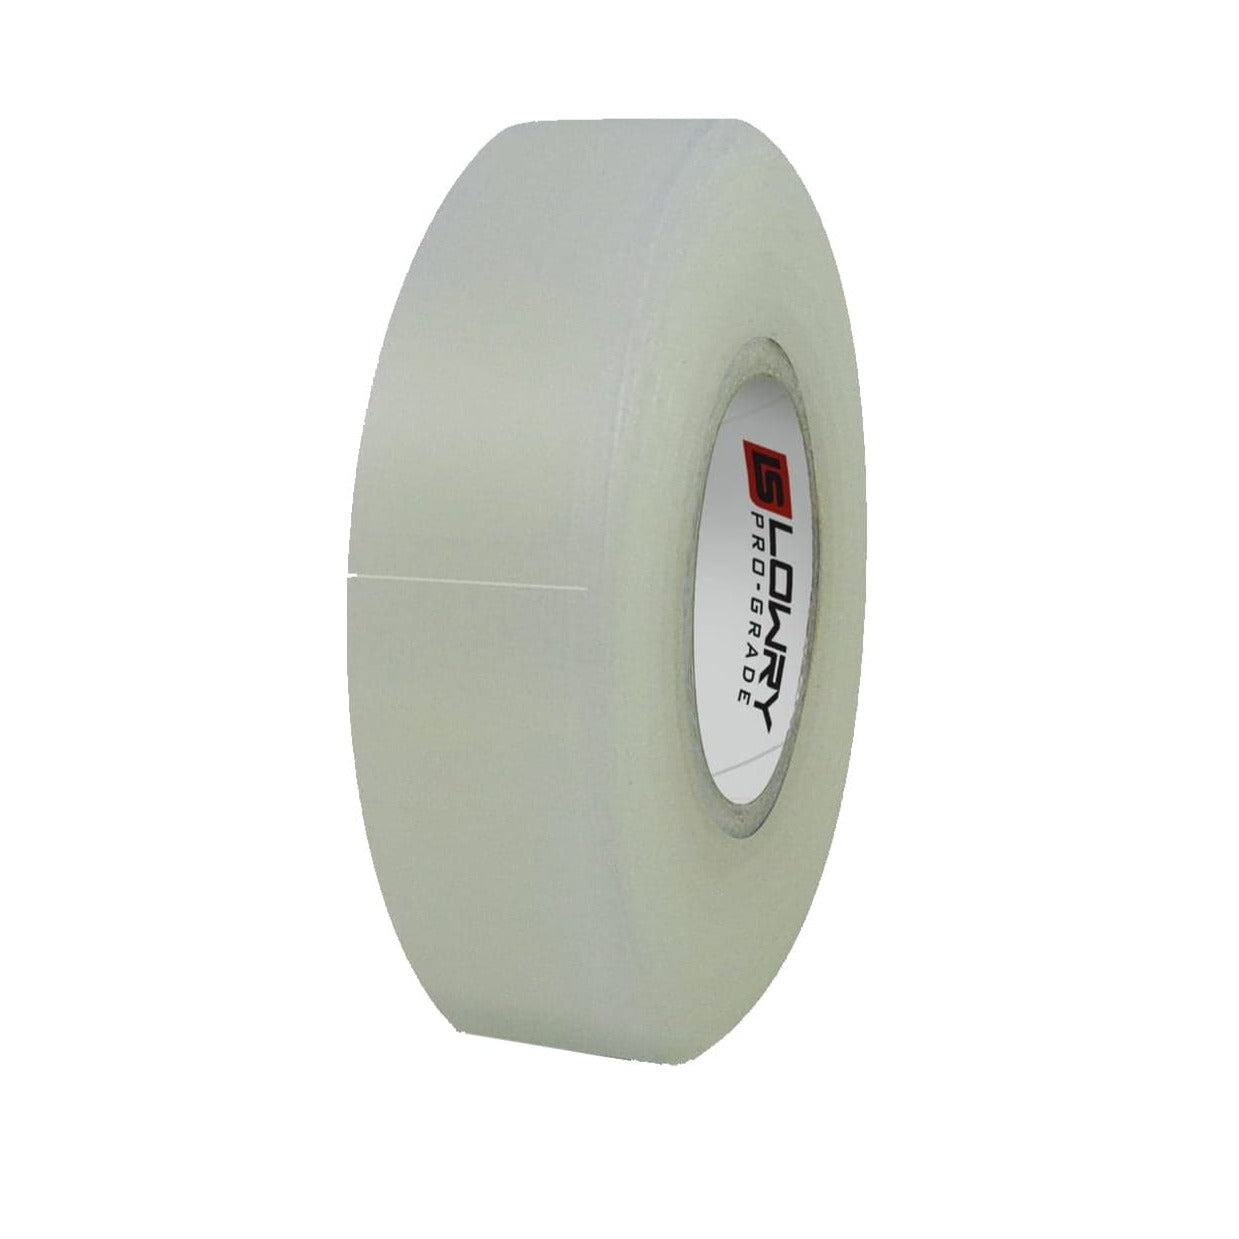 Lowry Sports Pro-Grade Hockey Sock Tape - Large Roll (6 Pack) - The Hockey Shop Source For Sports